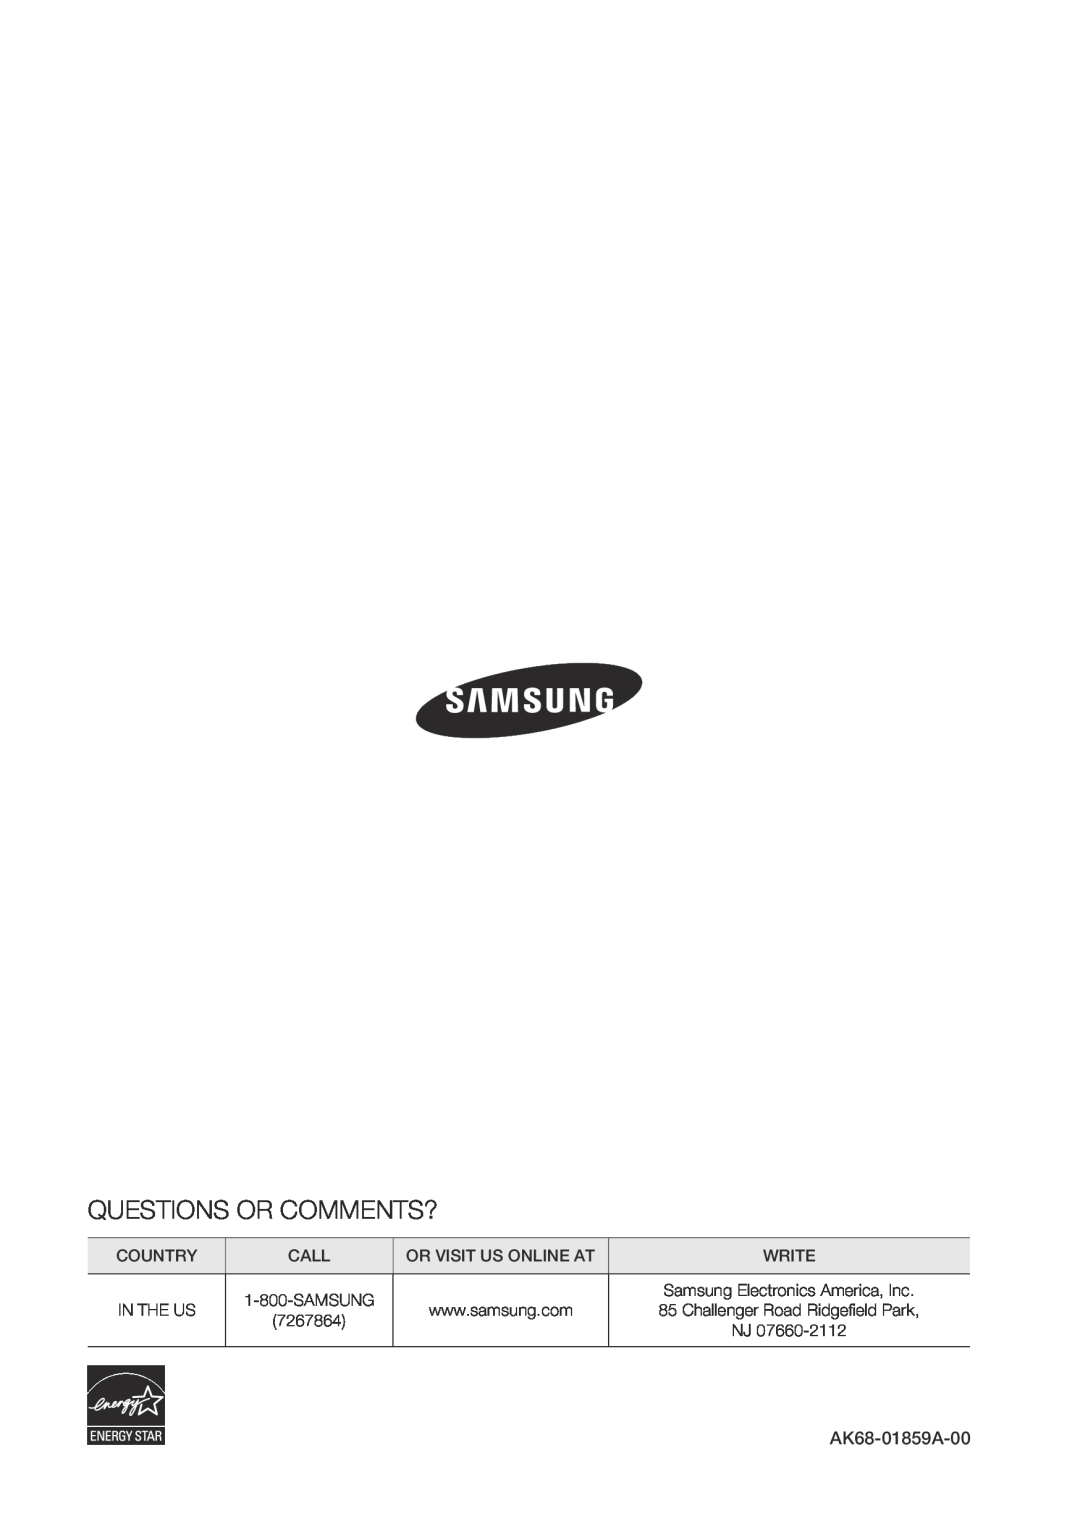 Samsung BD-C6500/XEF, BD-C6500/EDC, BD-C6500/XAA, BD-C6500/XEE Questions Or Comments?, Country, In The Us, AK68-01859A-00 